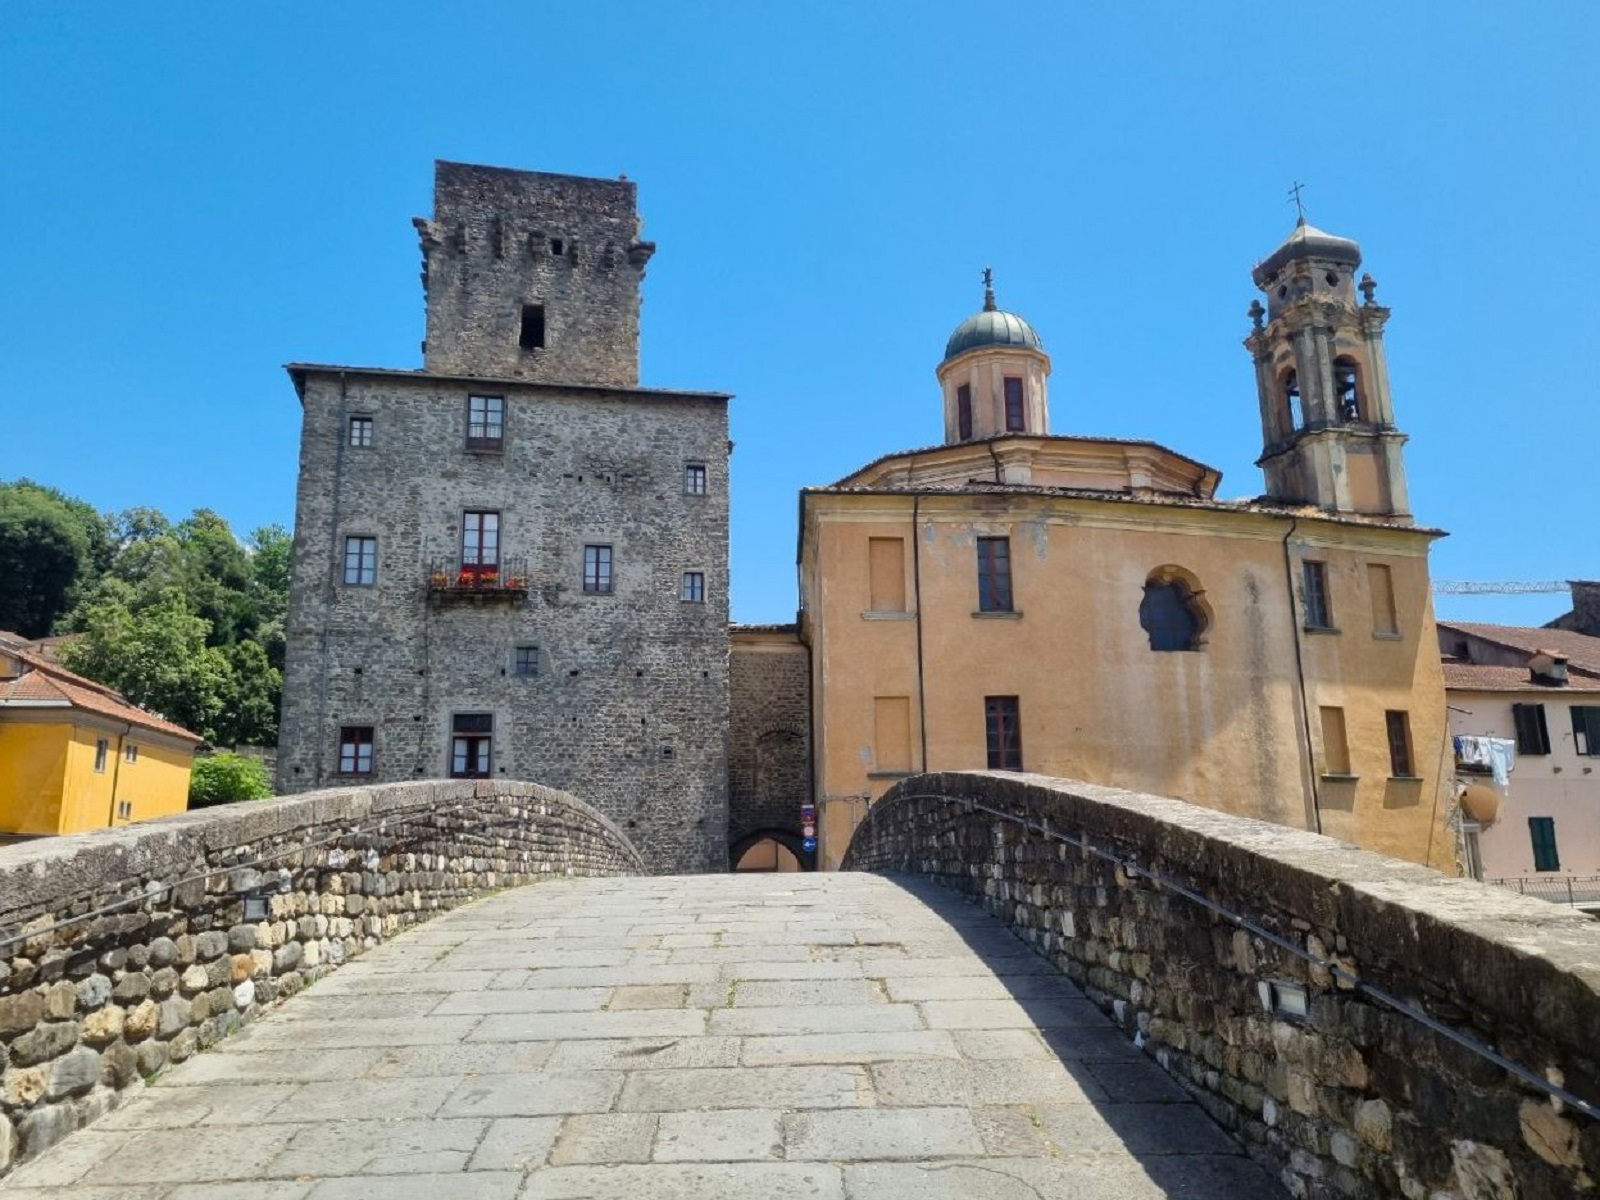 Guided tour to discover the treasures of Pontremoli Barocca